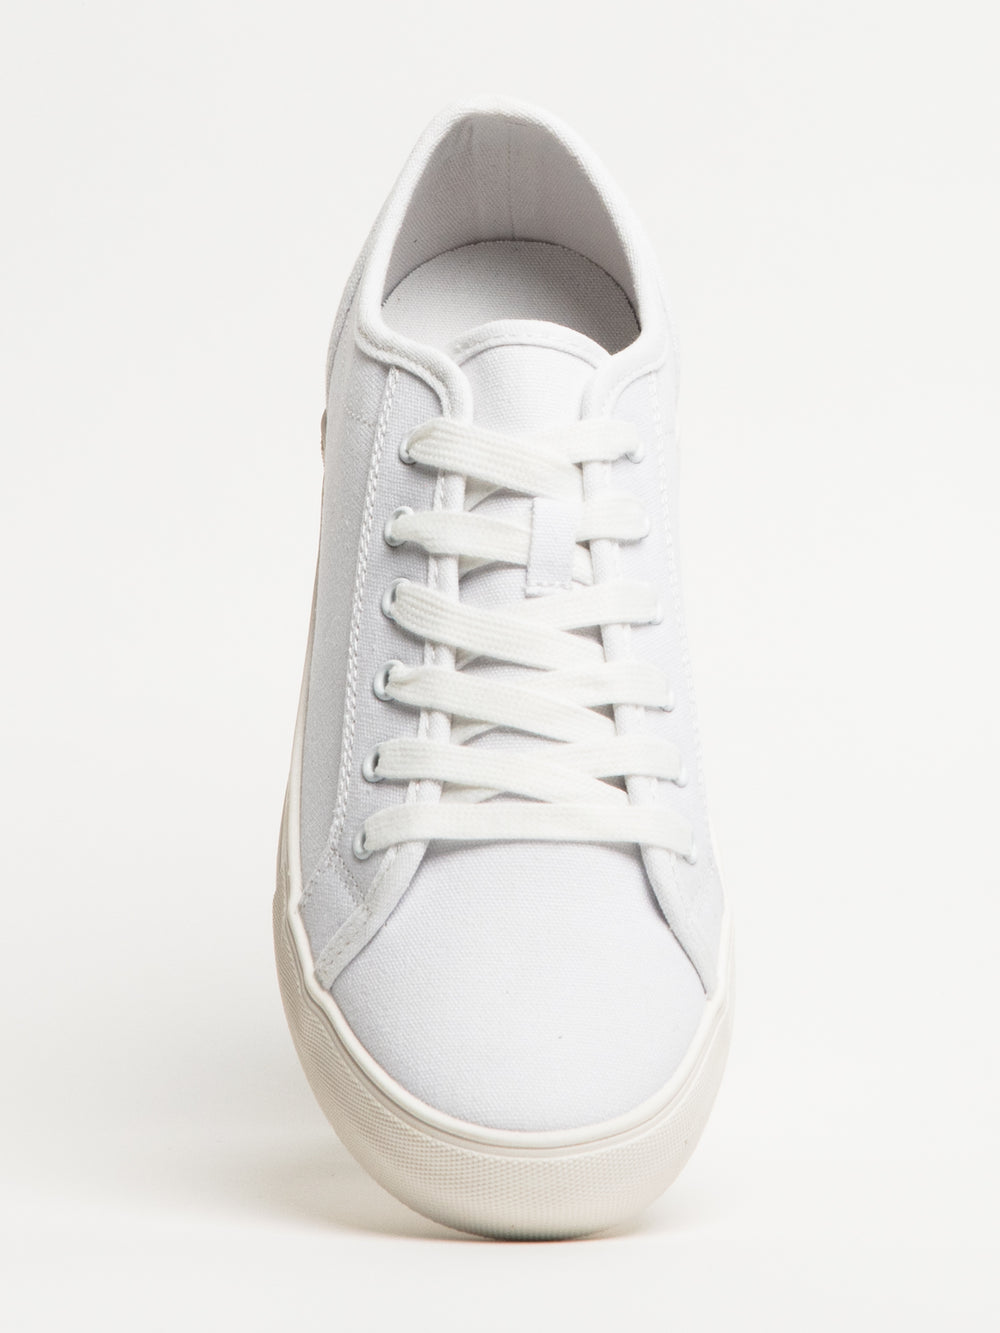 WOMENS DLG LILY  SNEAKER